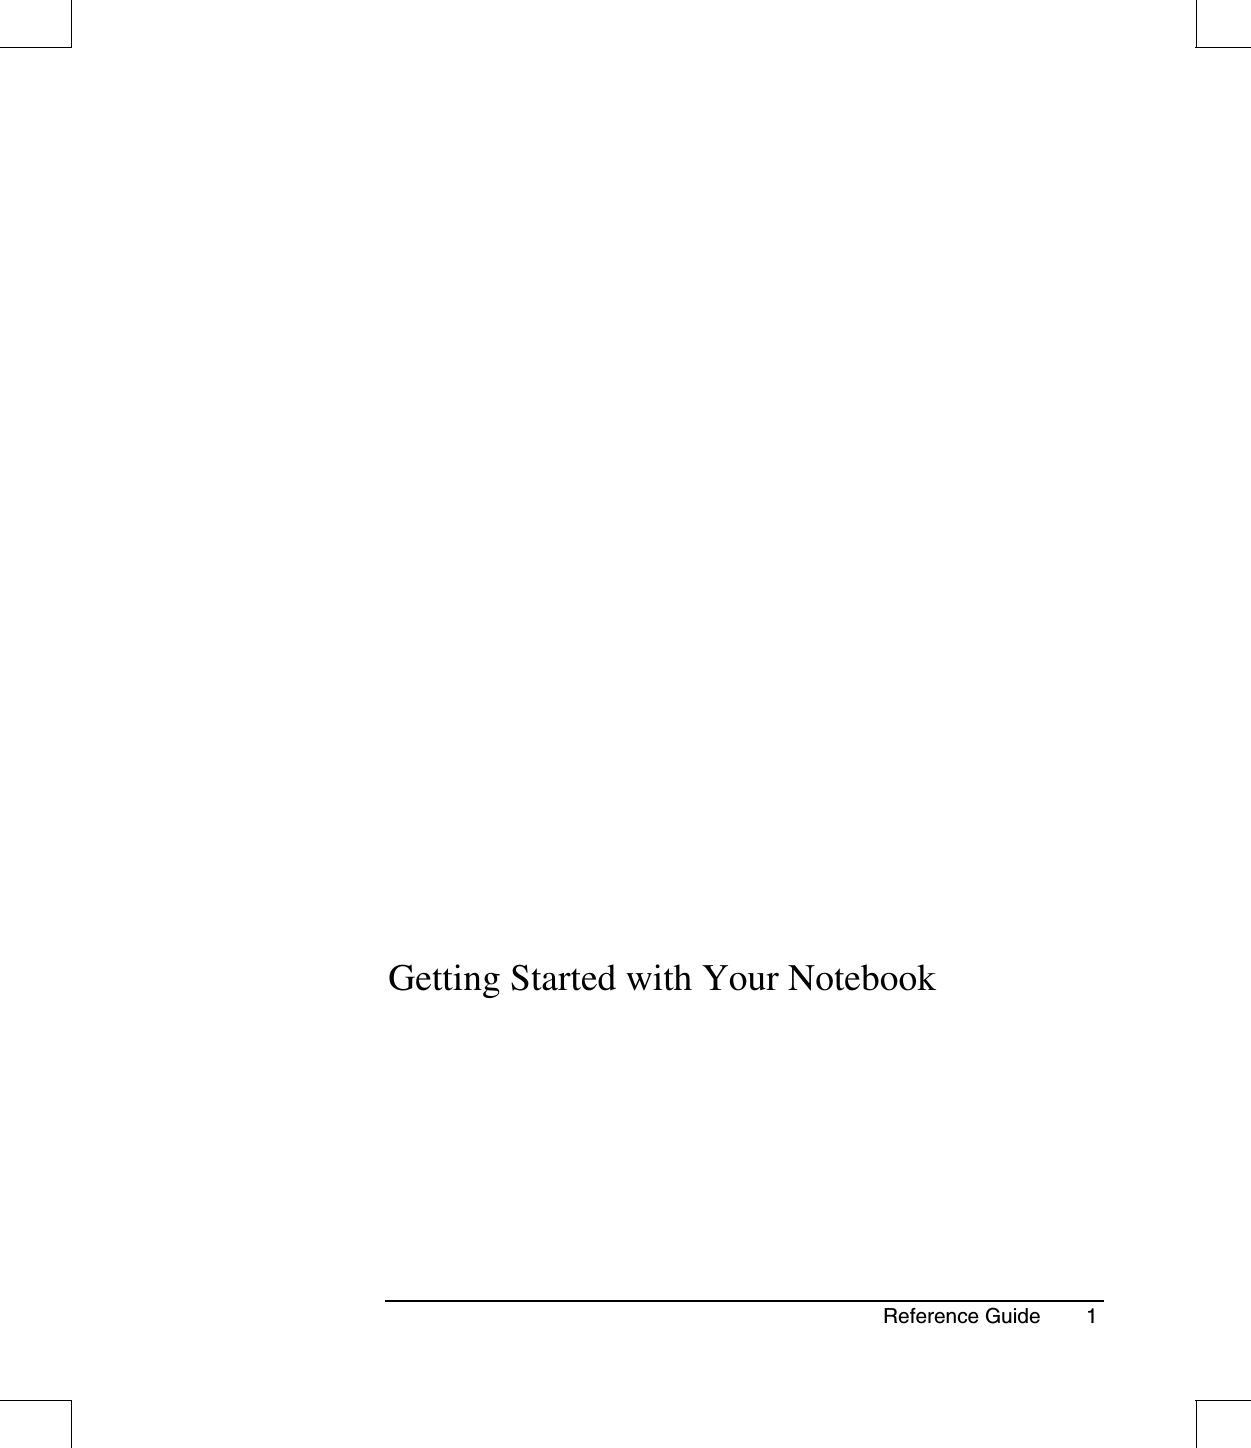 Reference Guide 1Getting Started with Your Notebook